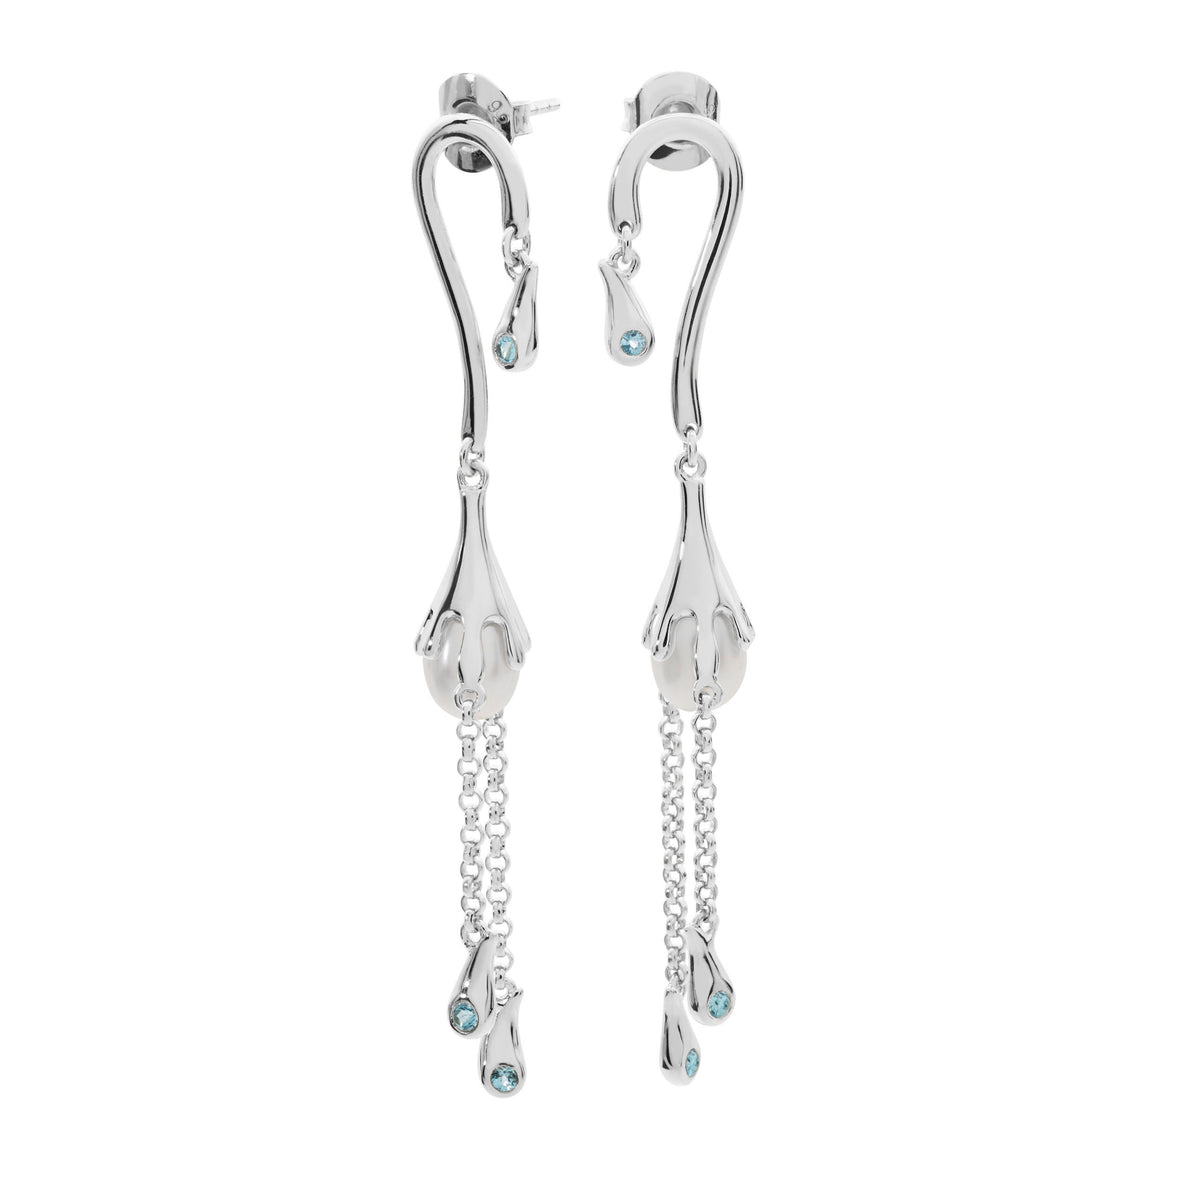 Pearl Drop Earrings with Blue Swarovski Crystals – Qucy Jewels